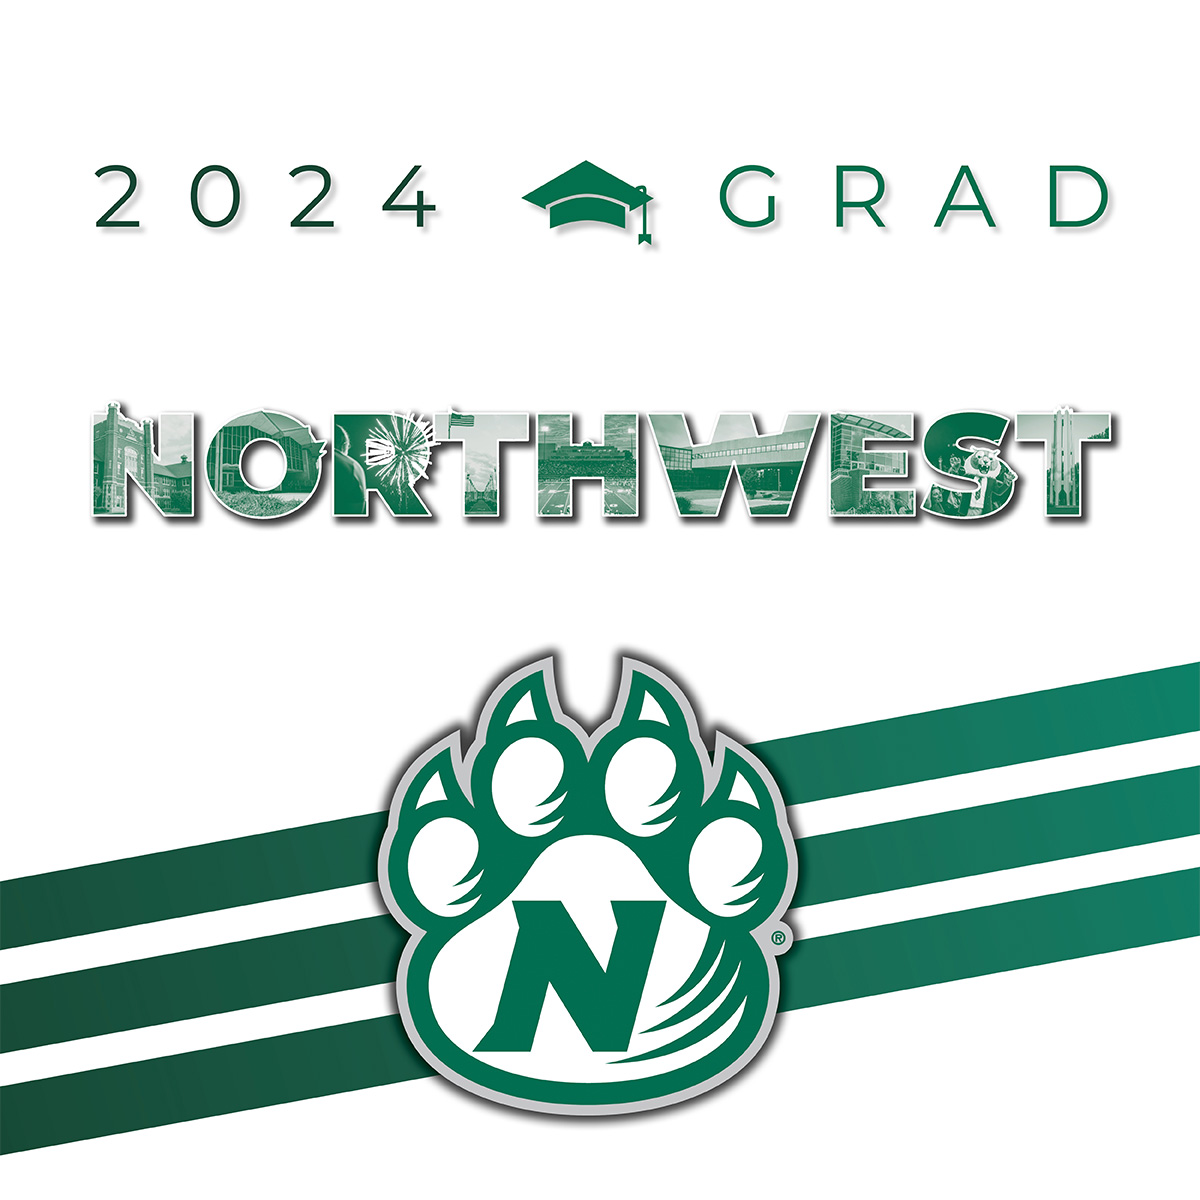 2021 bell tower grad profile image